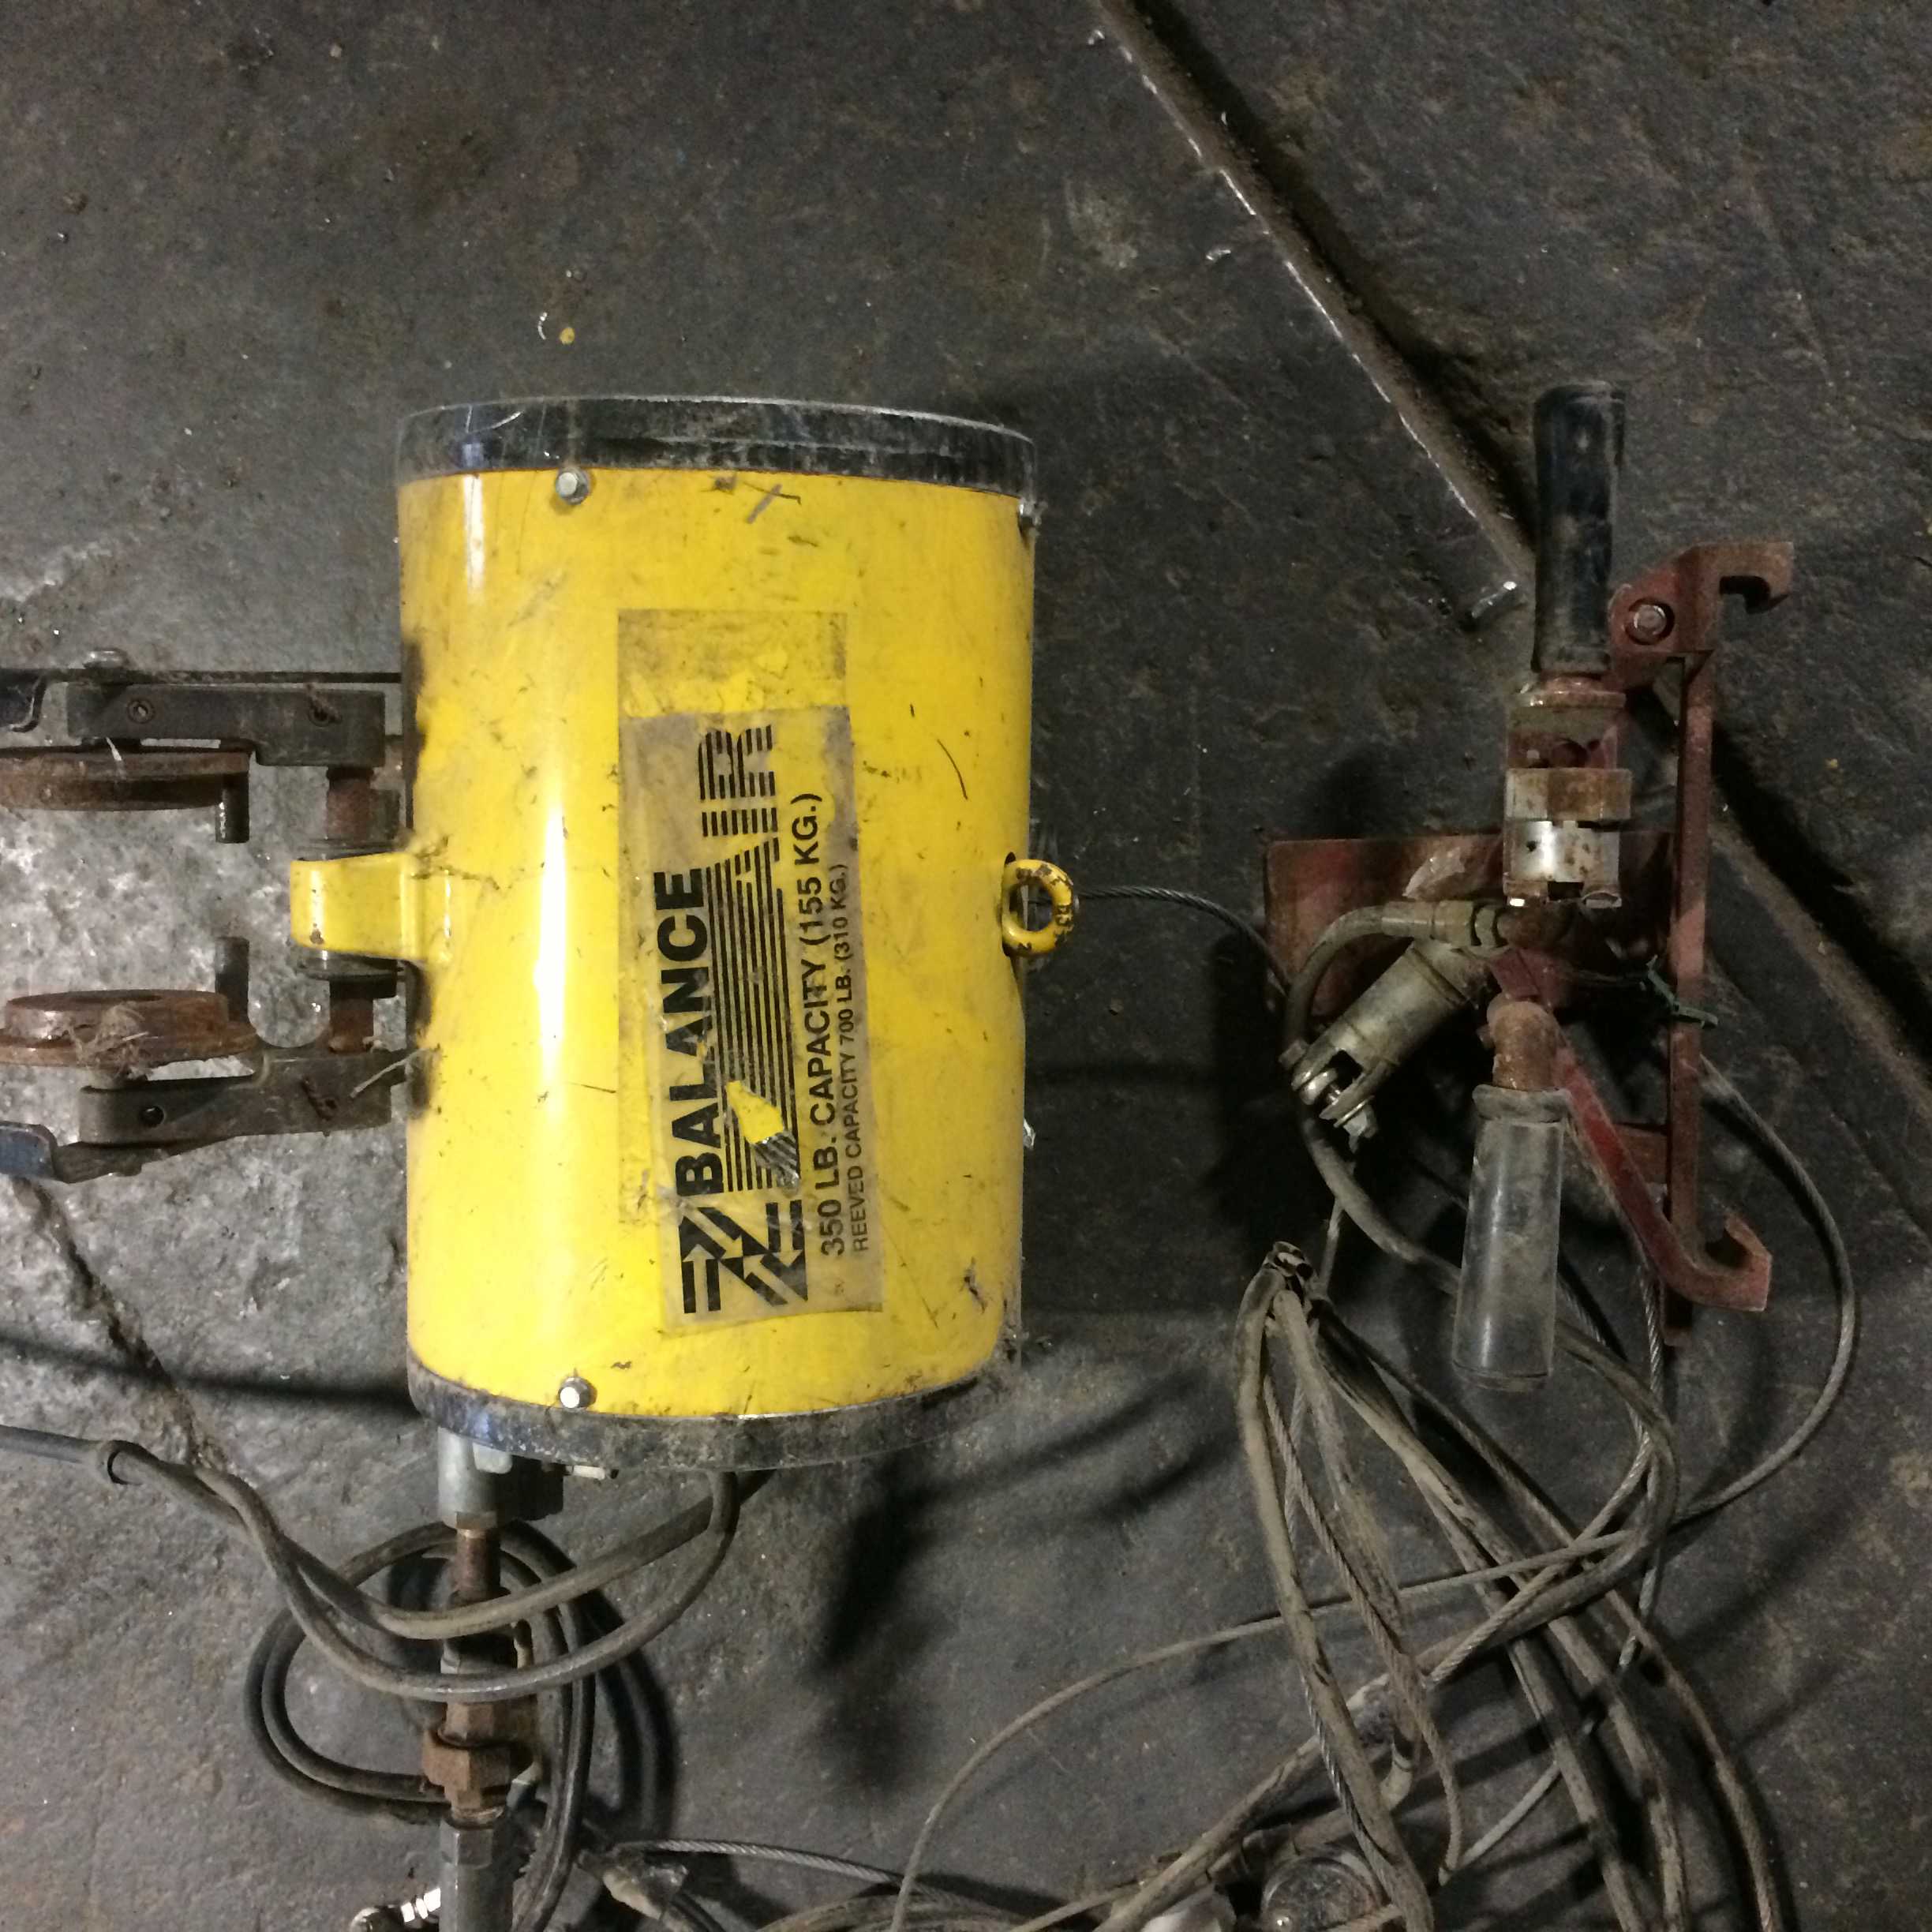 14 Units - Ingersoll Rand Zimmerman Pneumatic Air Balancers, Single Wire Rope Unit, 350 Lb And 250 Lb Hoists)